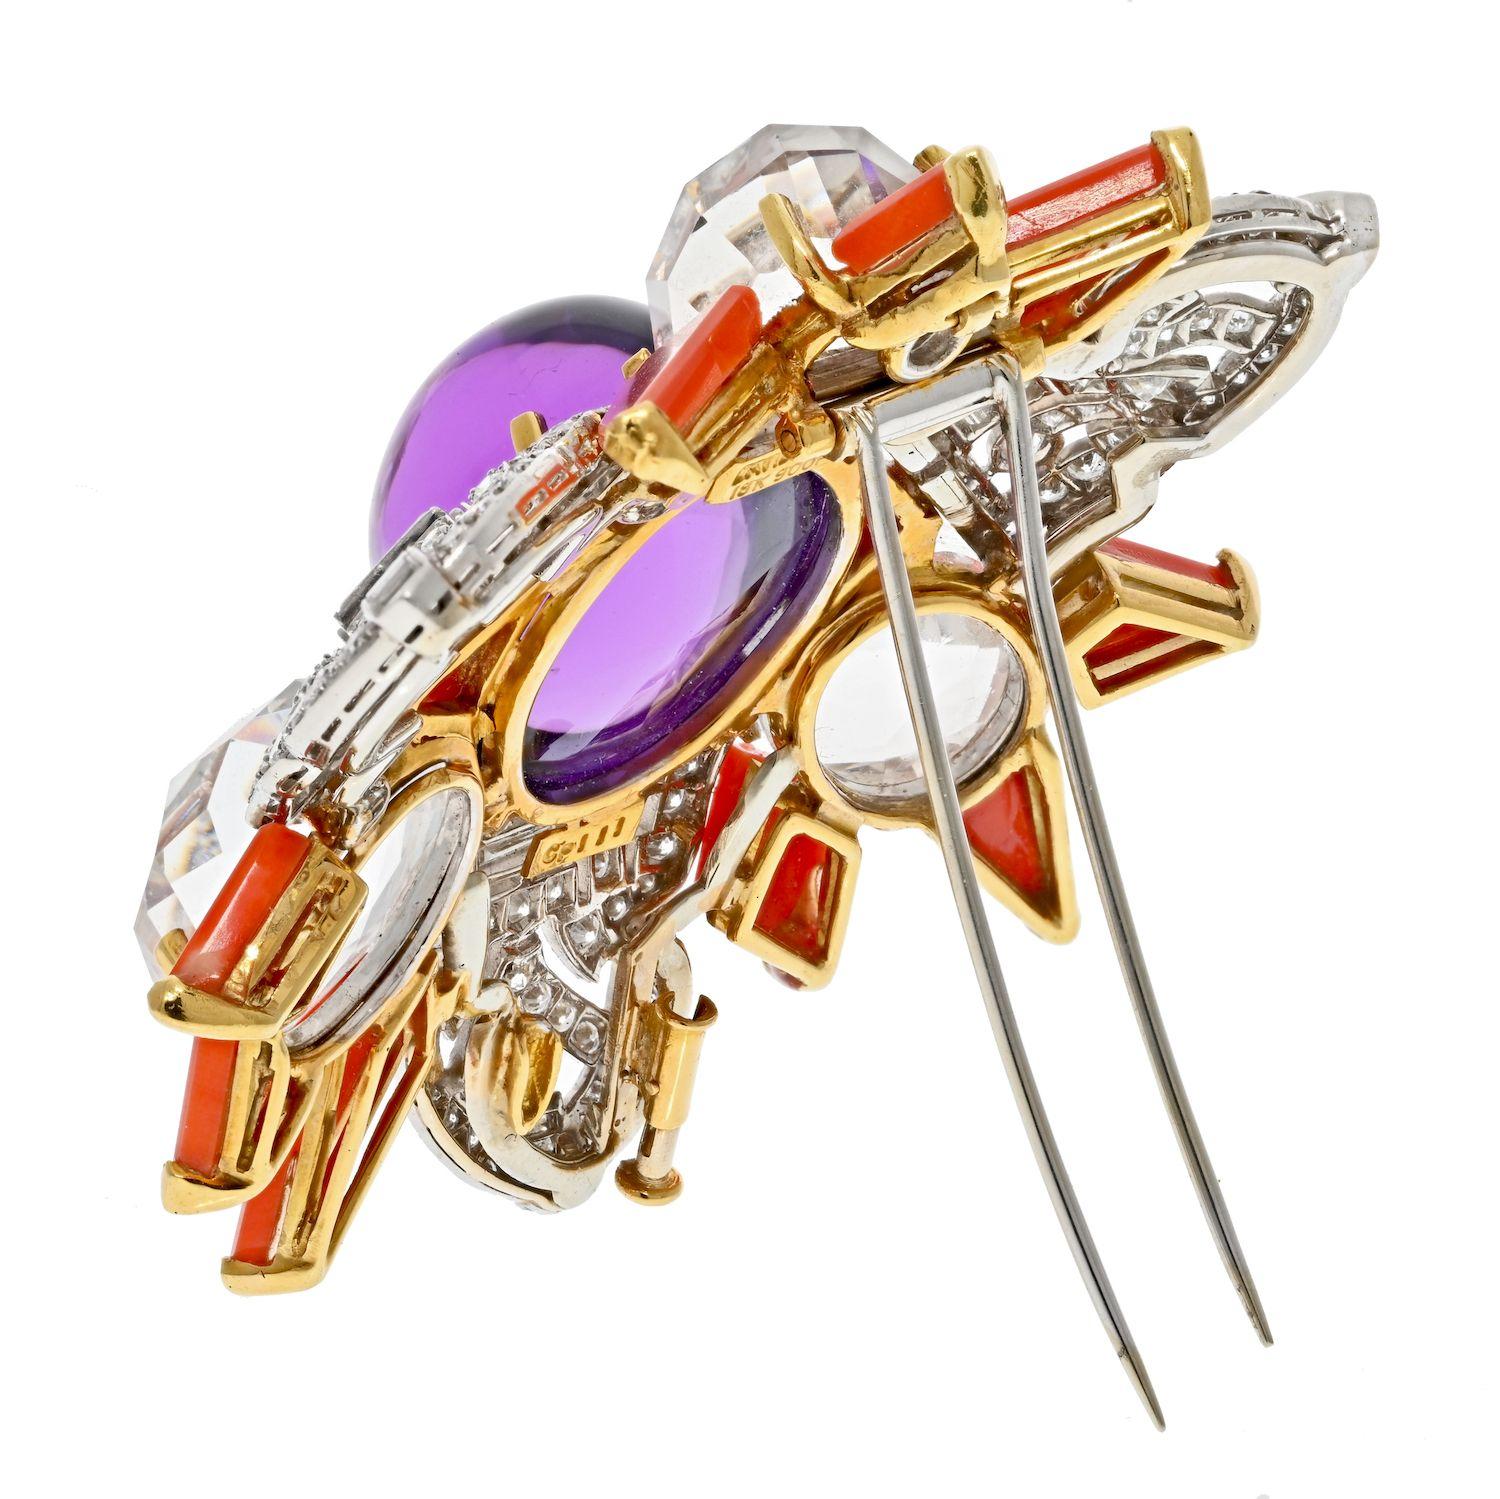 David Webb Platinum & 18K Yellow Gold Amethyst, Coral And Rock Crystal Star Brooch.

An exciting brooch by David Webb crafted in 18K yellow gold with diamonds set in platinum. Centering a cabochon oval cut amethyst, three checkerboard cut rock